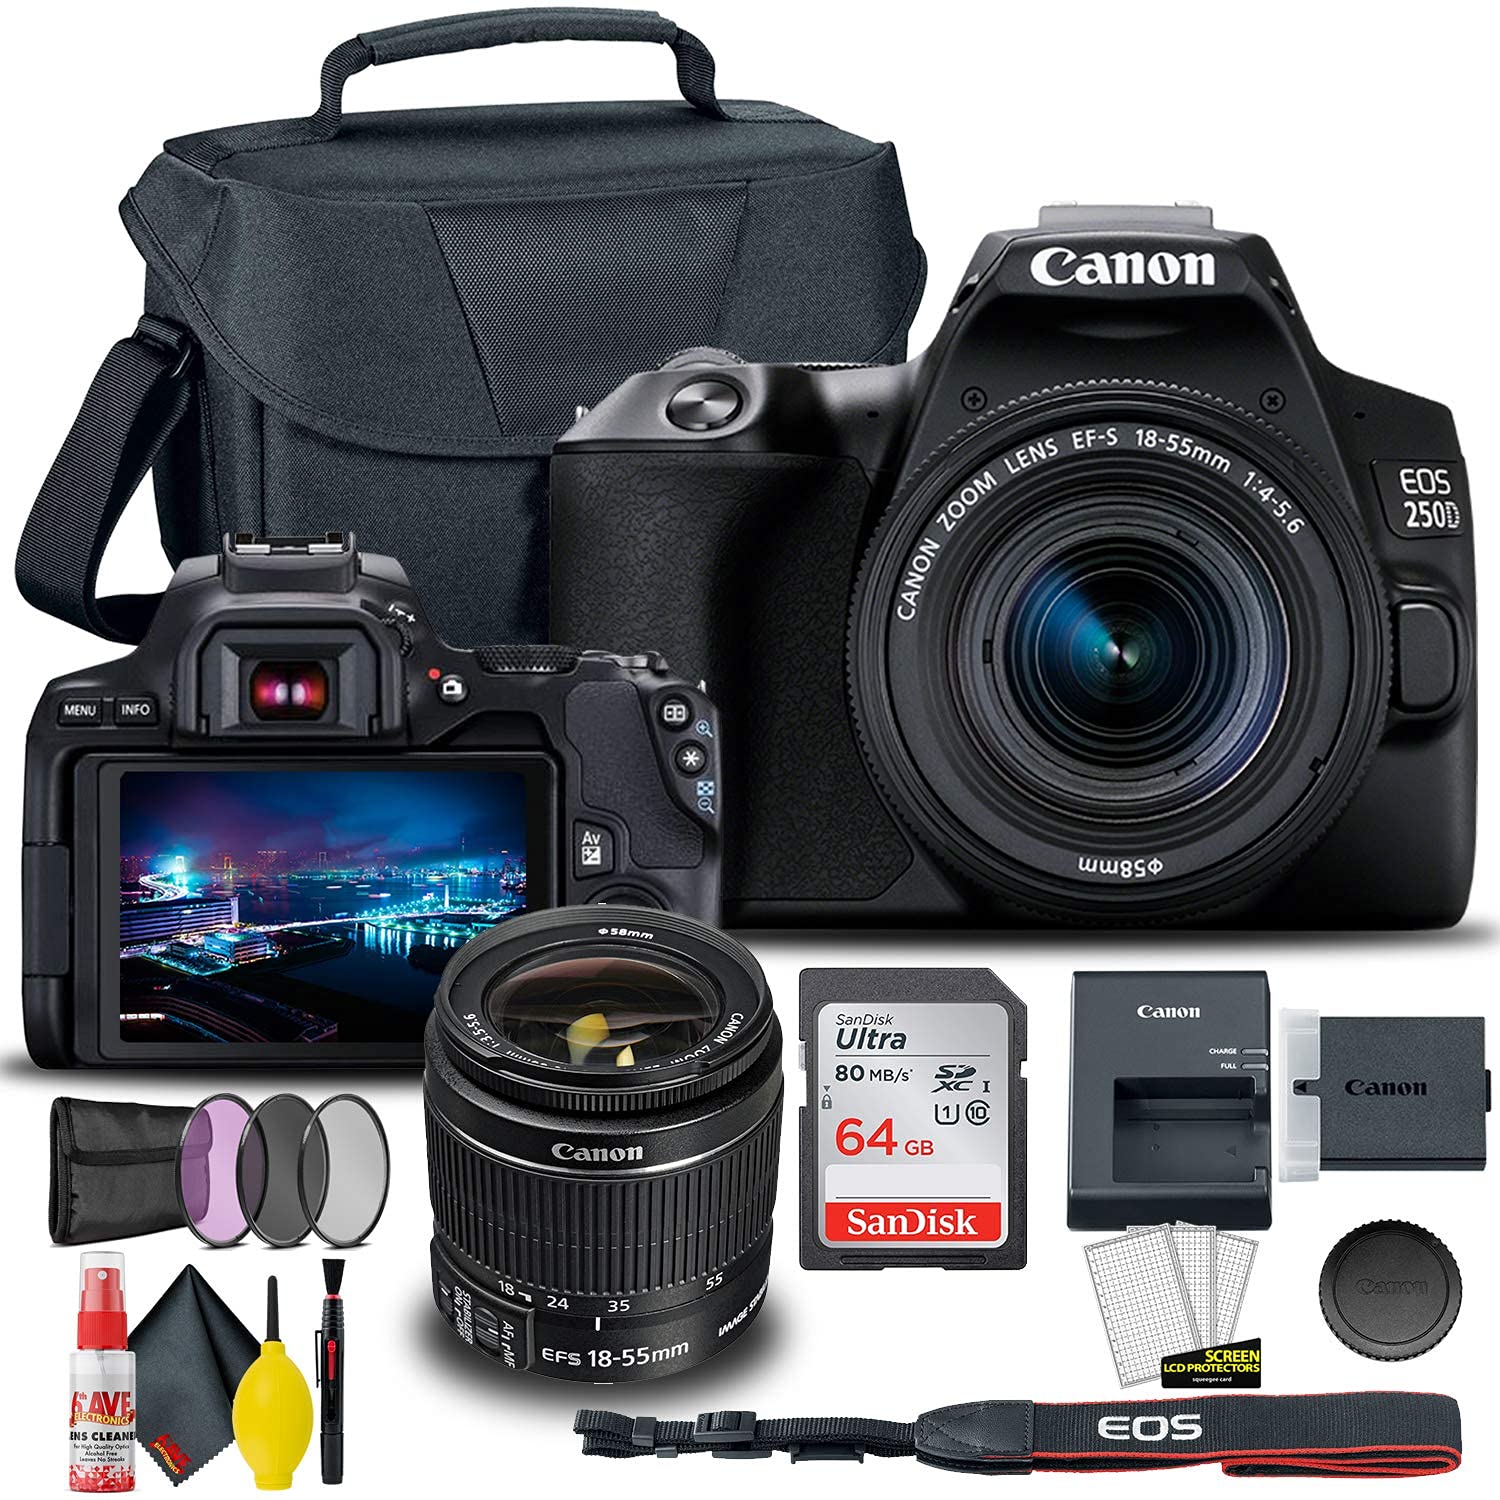 Canon EOS 250D / Rebel SL3 DSLR Camera with 18-55mm Lens + Creative Filter Set, EOS Camera Bag + Sandisk Ultra 64GB Card + 6AVE Electronics Cleanin...